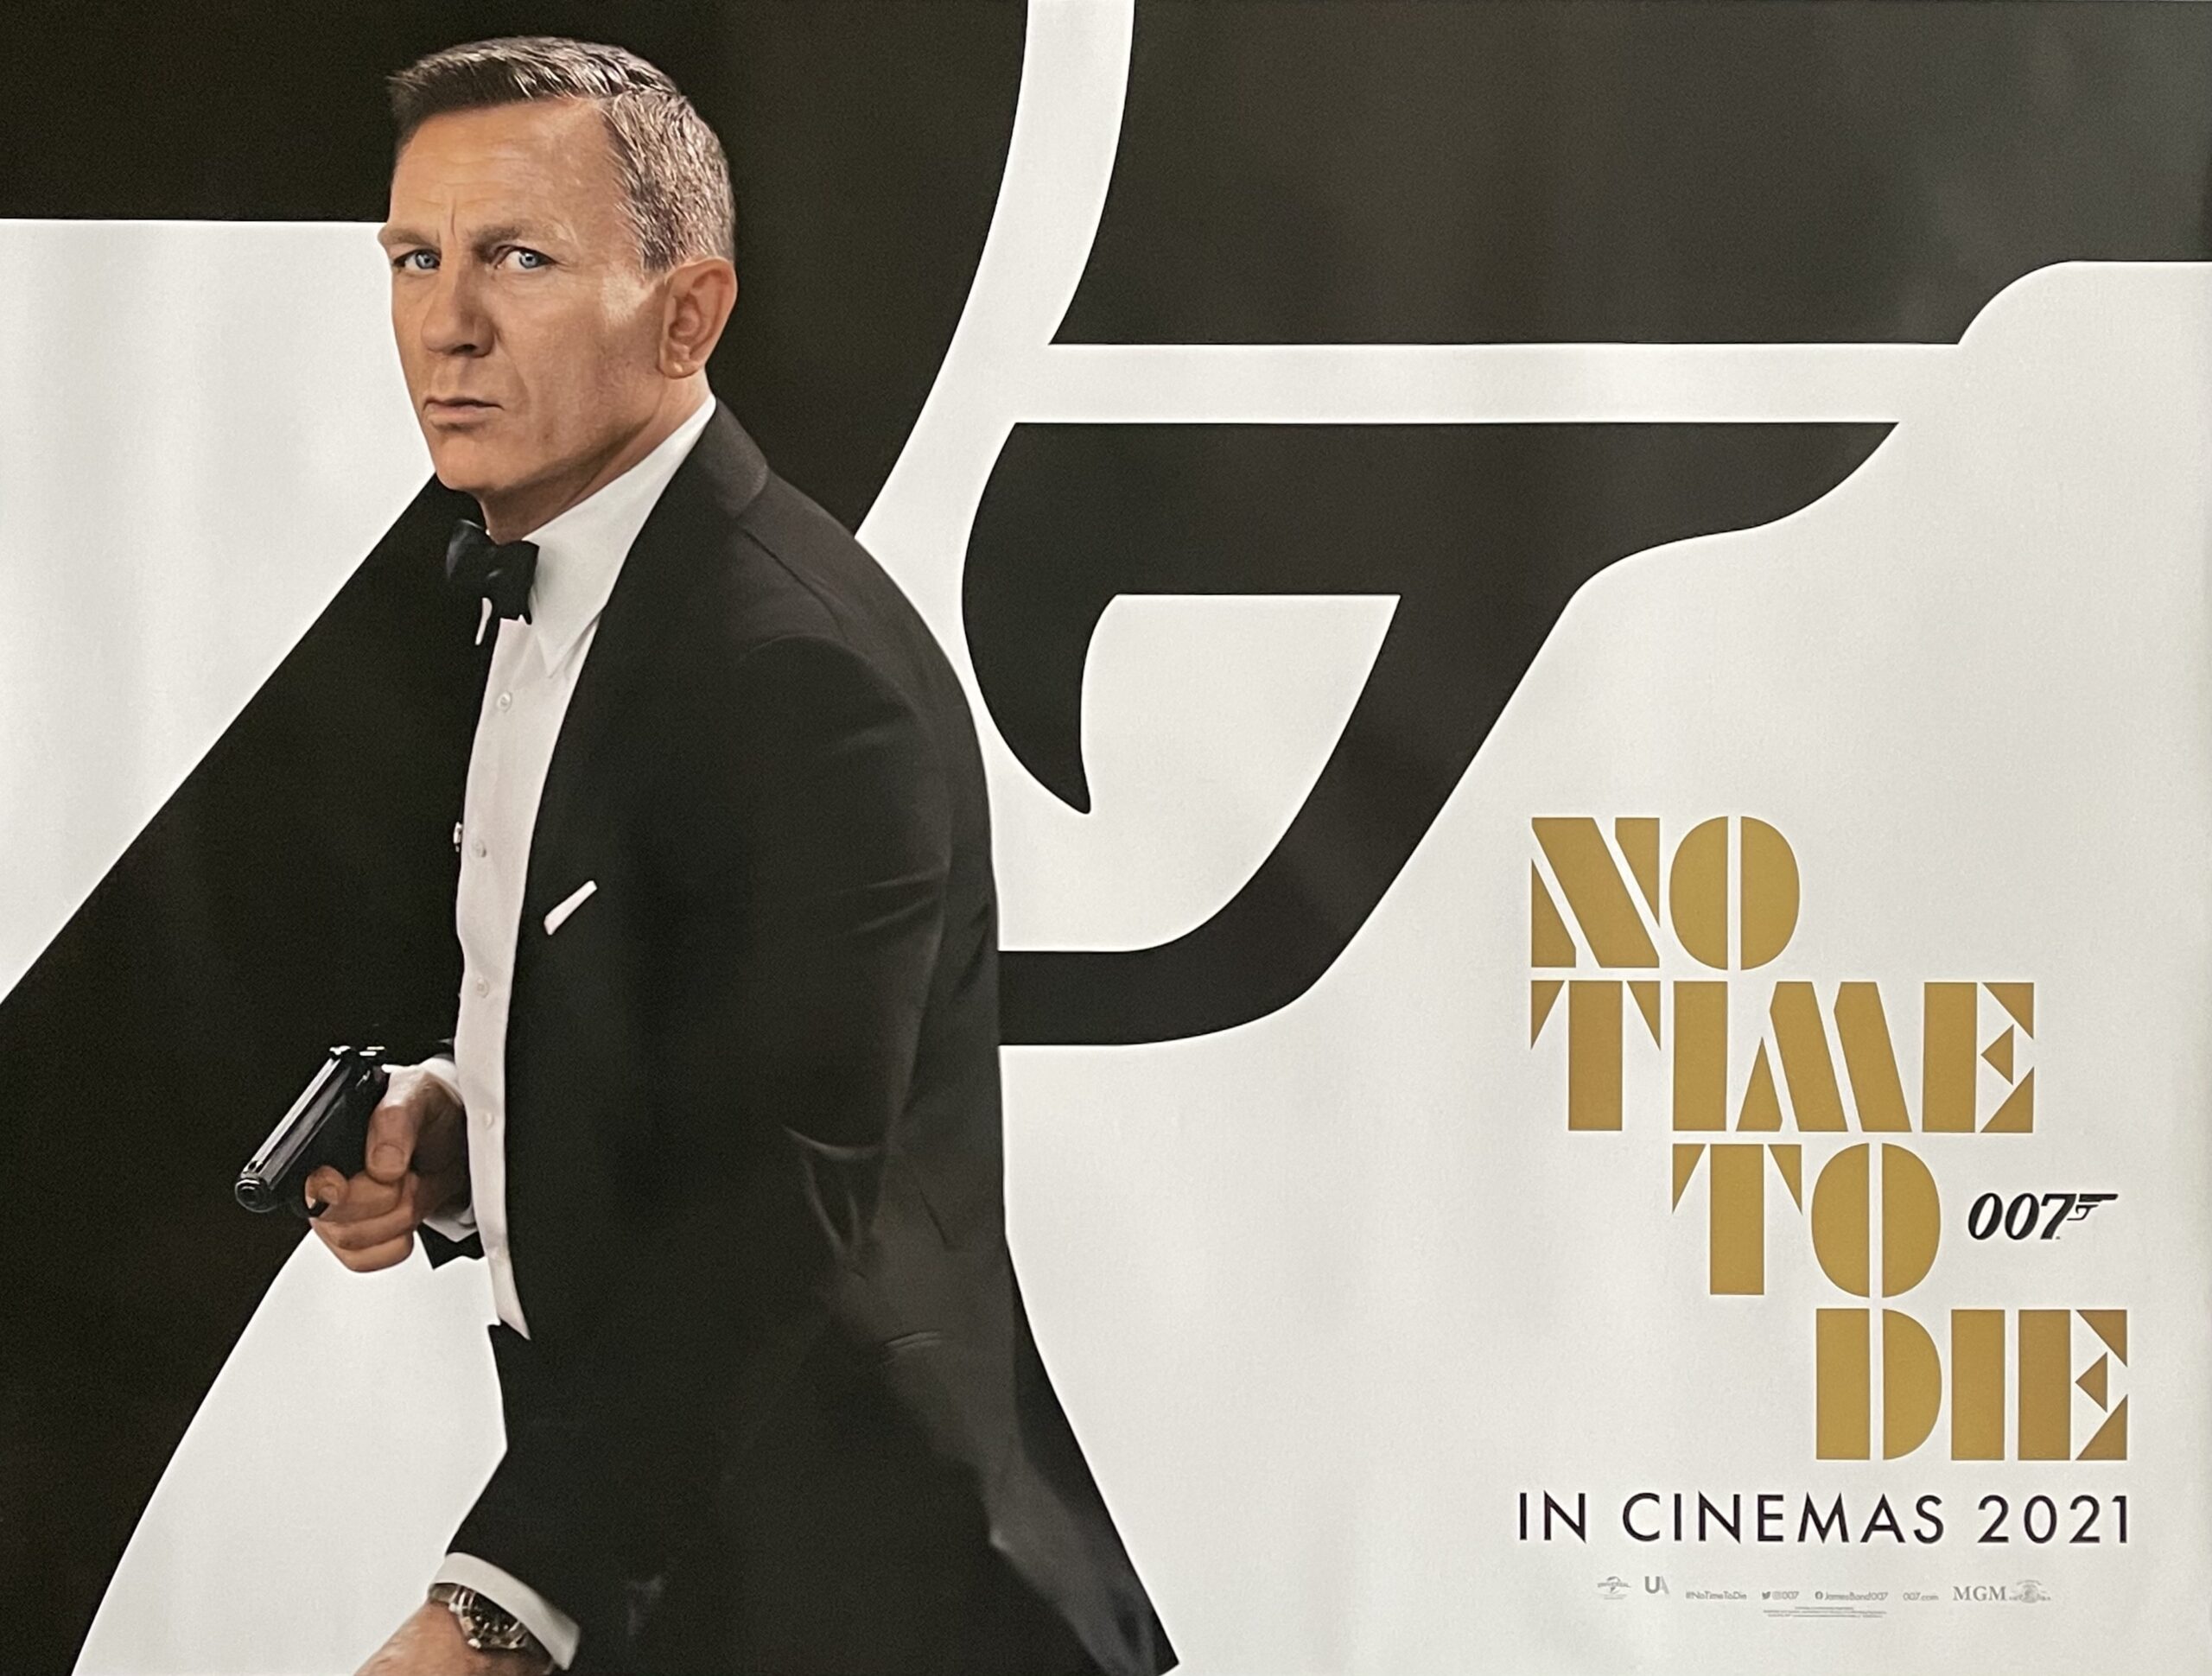 Daniel Craig departs from his role as James Bond in No Time To Die- Chris Hunneysett